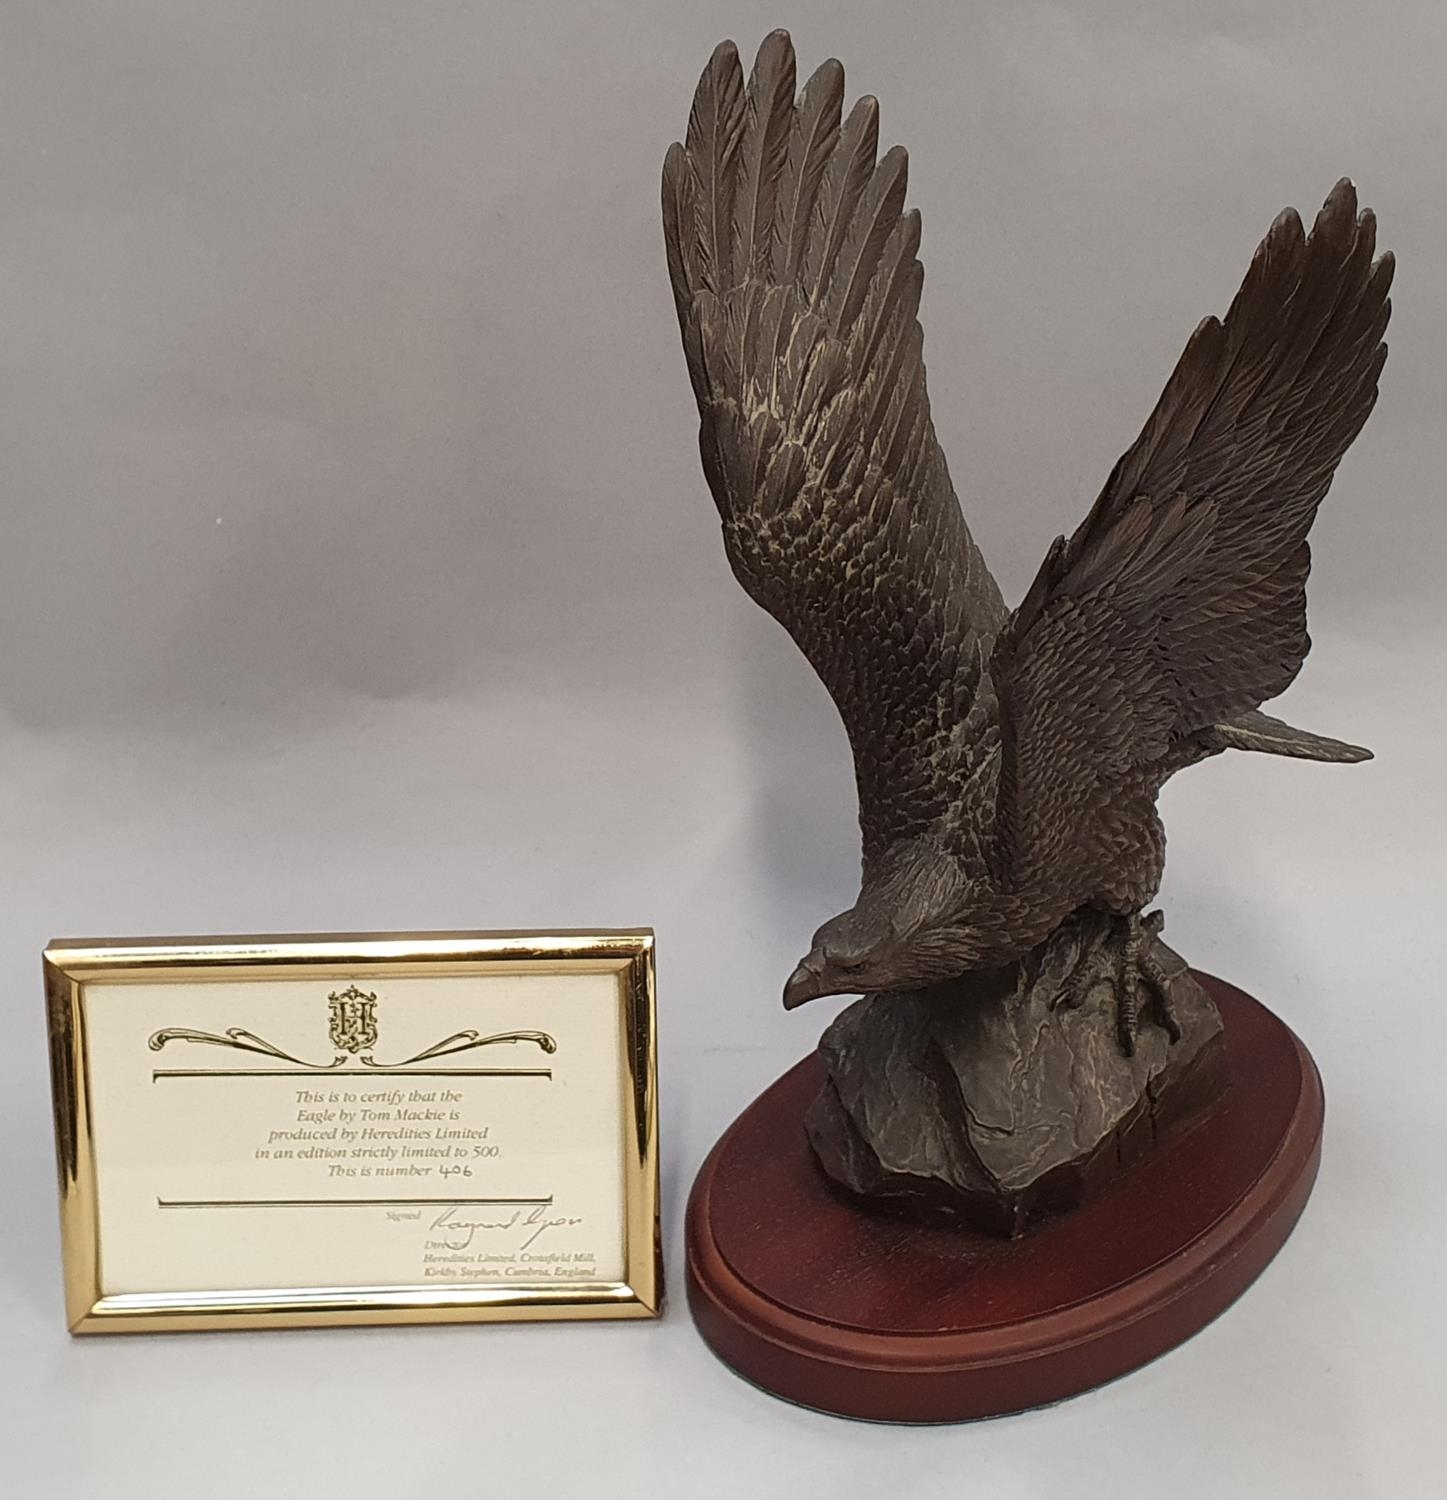 Heredites limited edition eagle by Tom Mackie 406/500 with certificate 32x15.5x21cm.